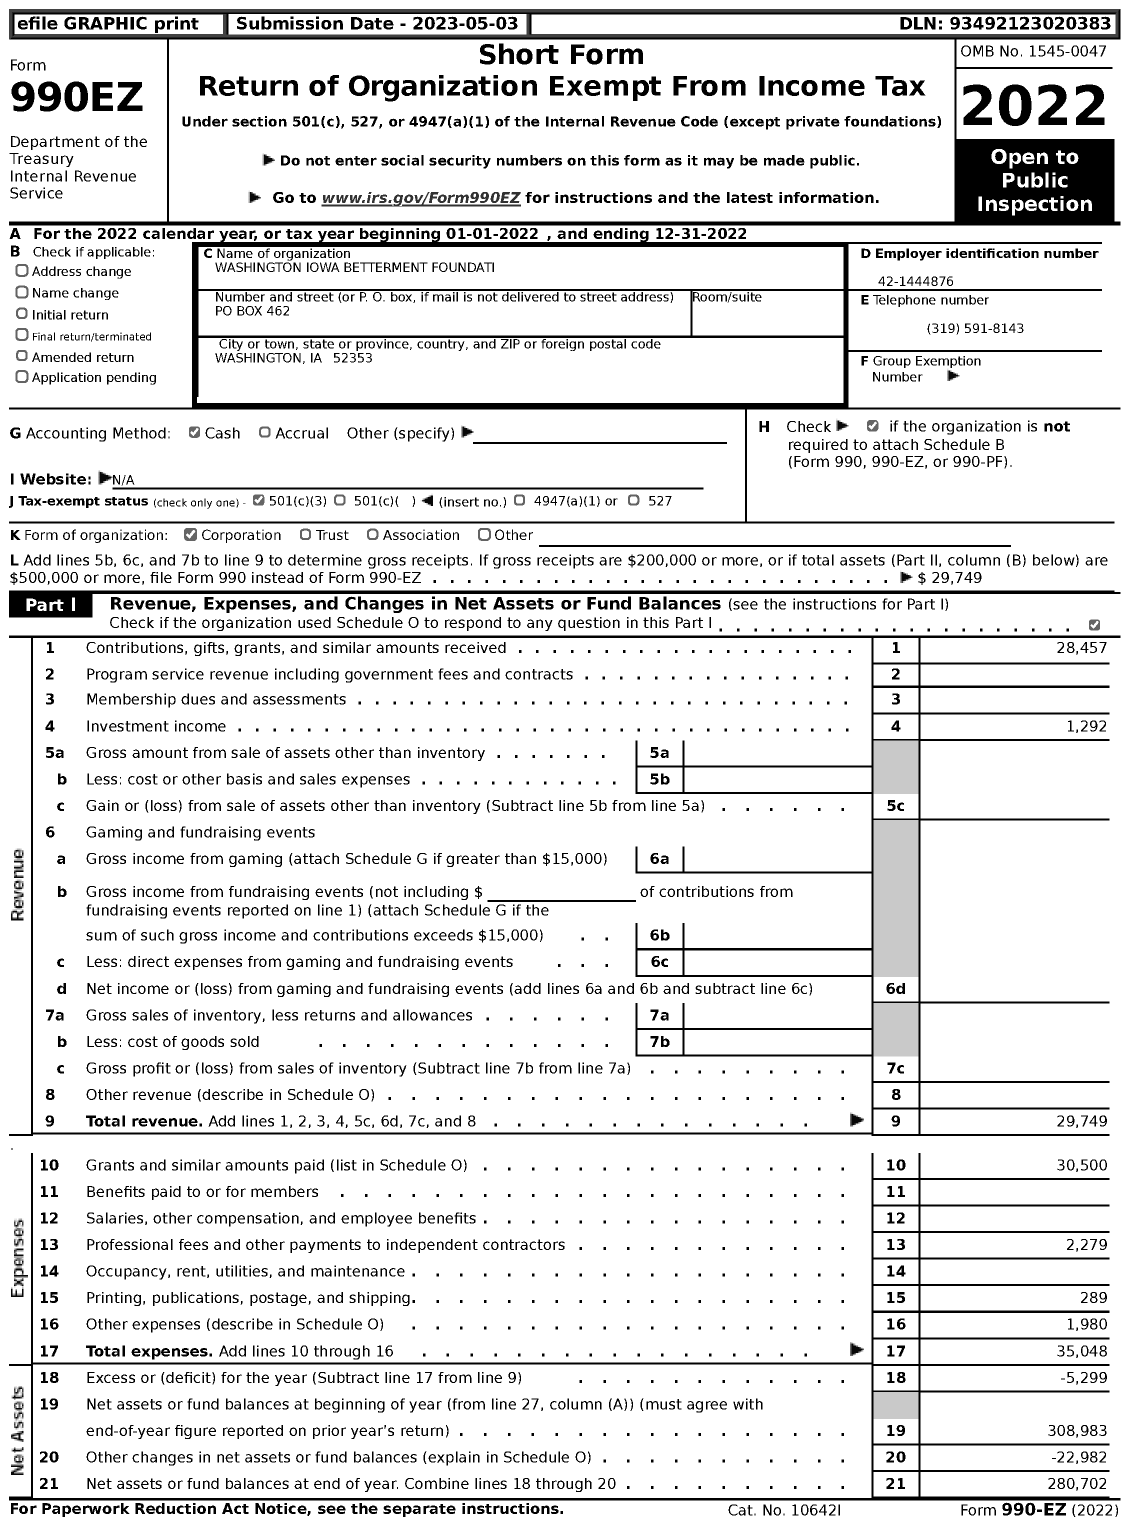 Image of first page of 2022 Form 990EZ for Washington Iowa Betterment Foundation